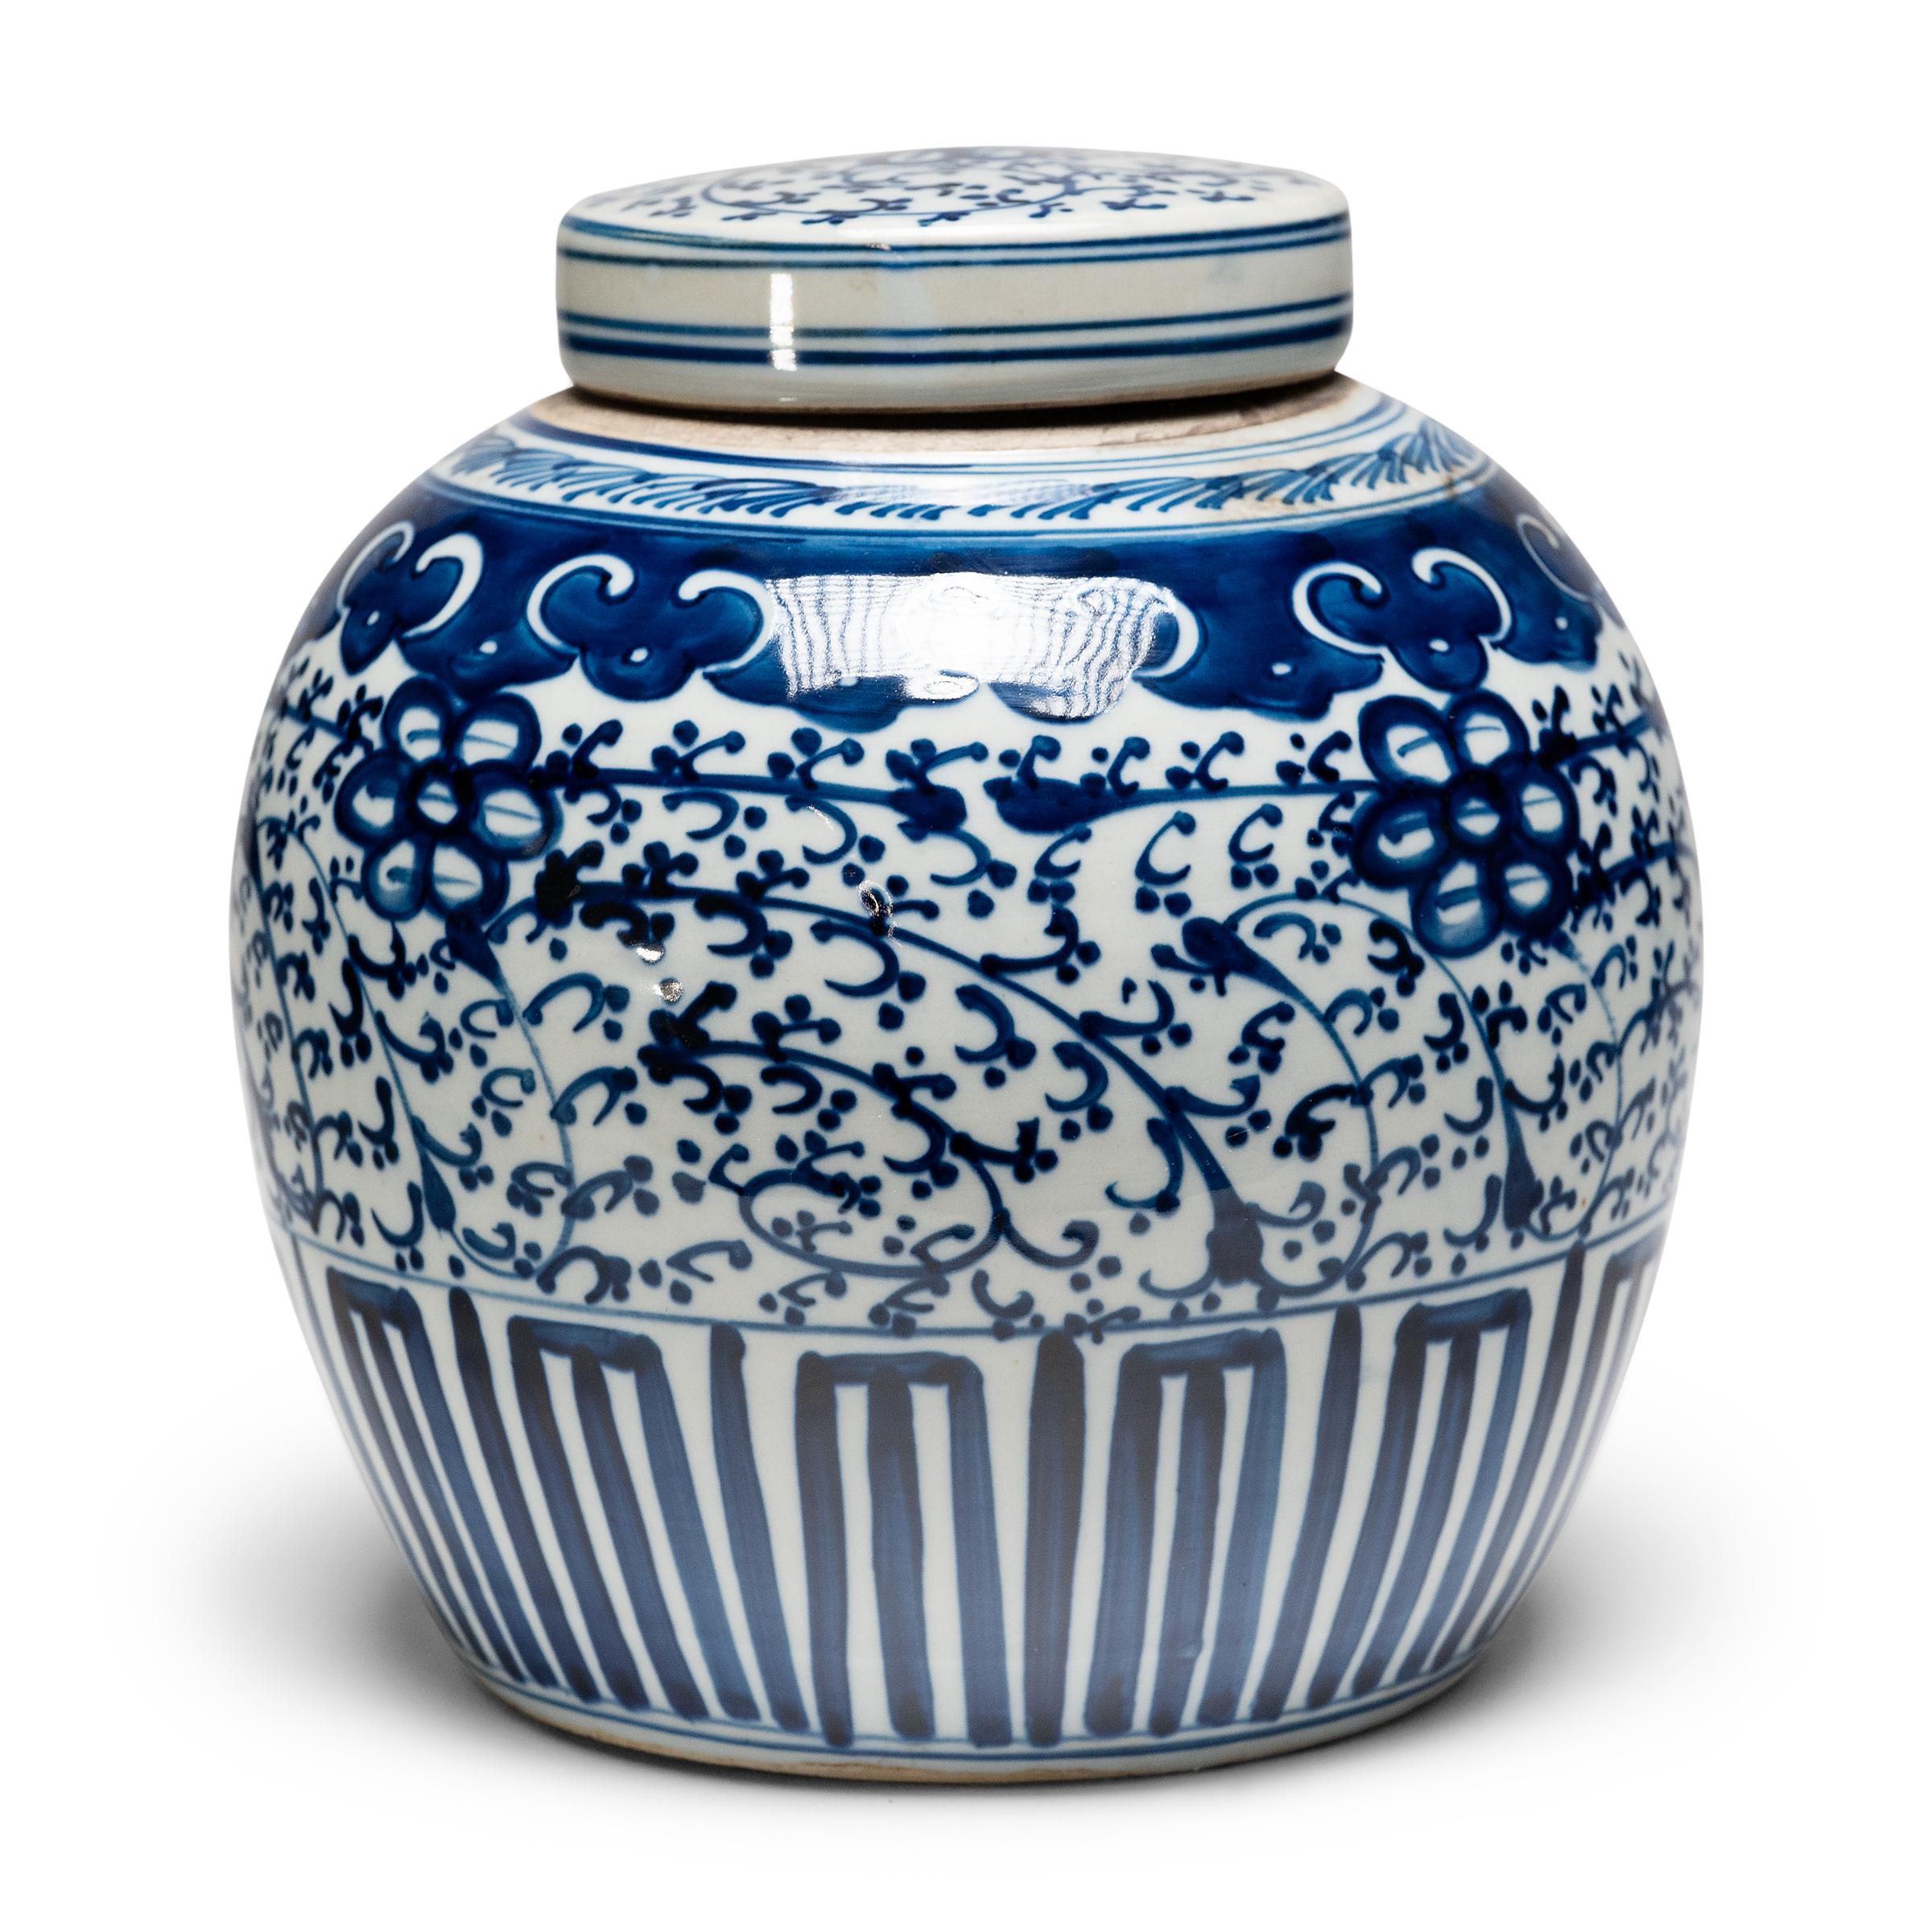 This porcelain tea leaf jar is beautifully glazed in the blue-and-white manner, with hand-painted cobalt-blue decoration against a crisp white field. The porcelain jar has a rounded form and flat lid, a traditional shape for jars used to hold